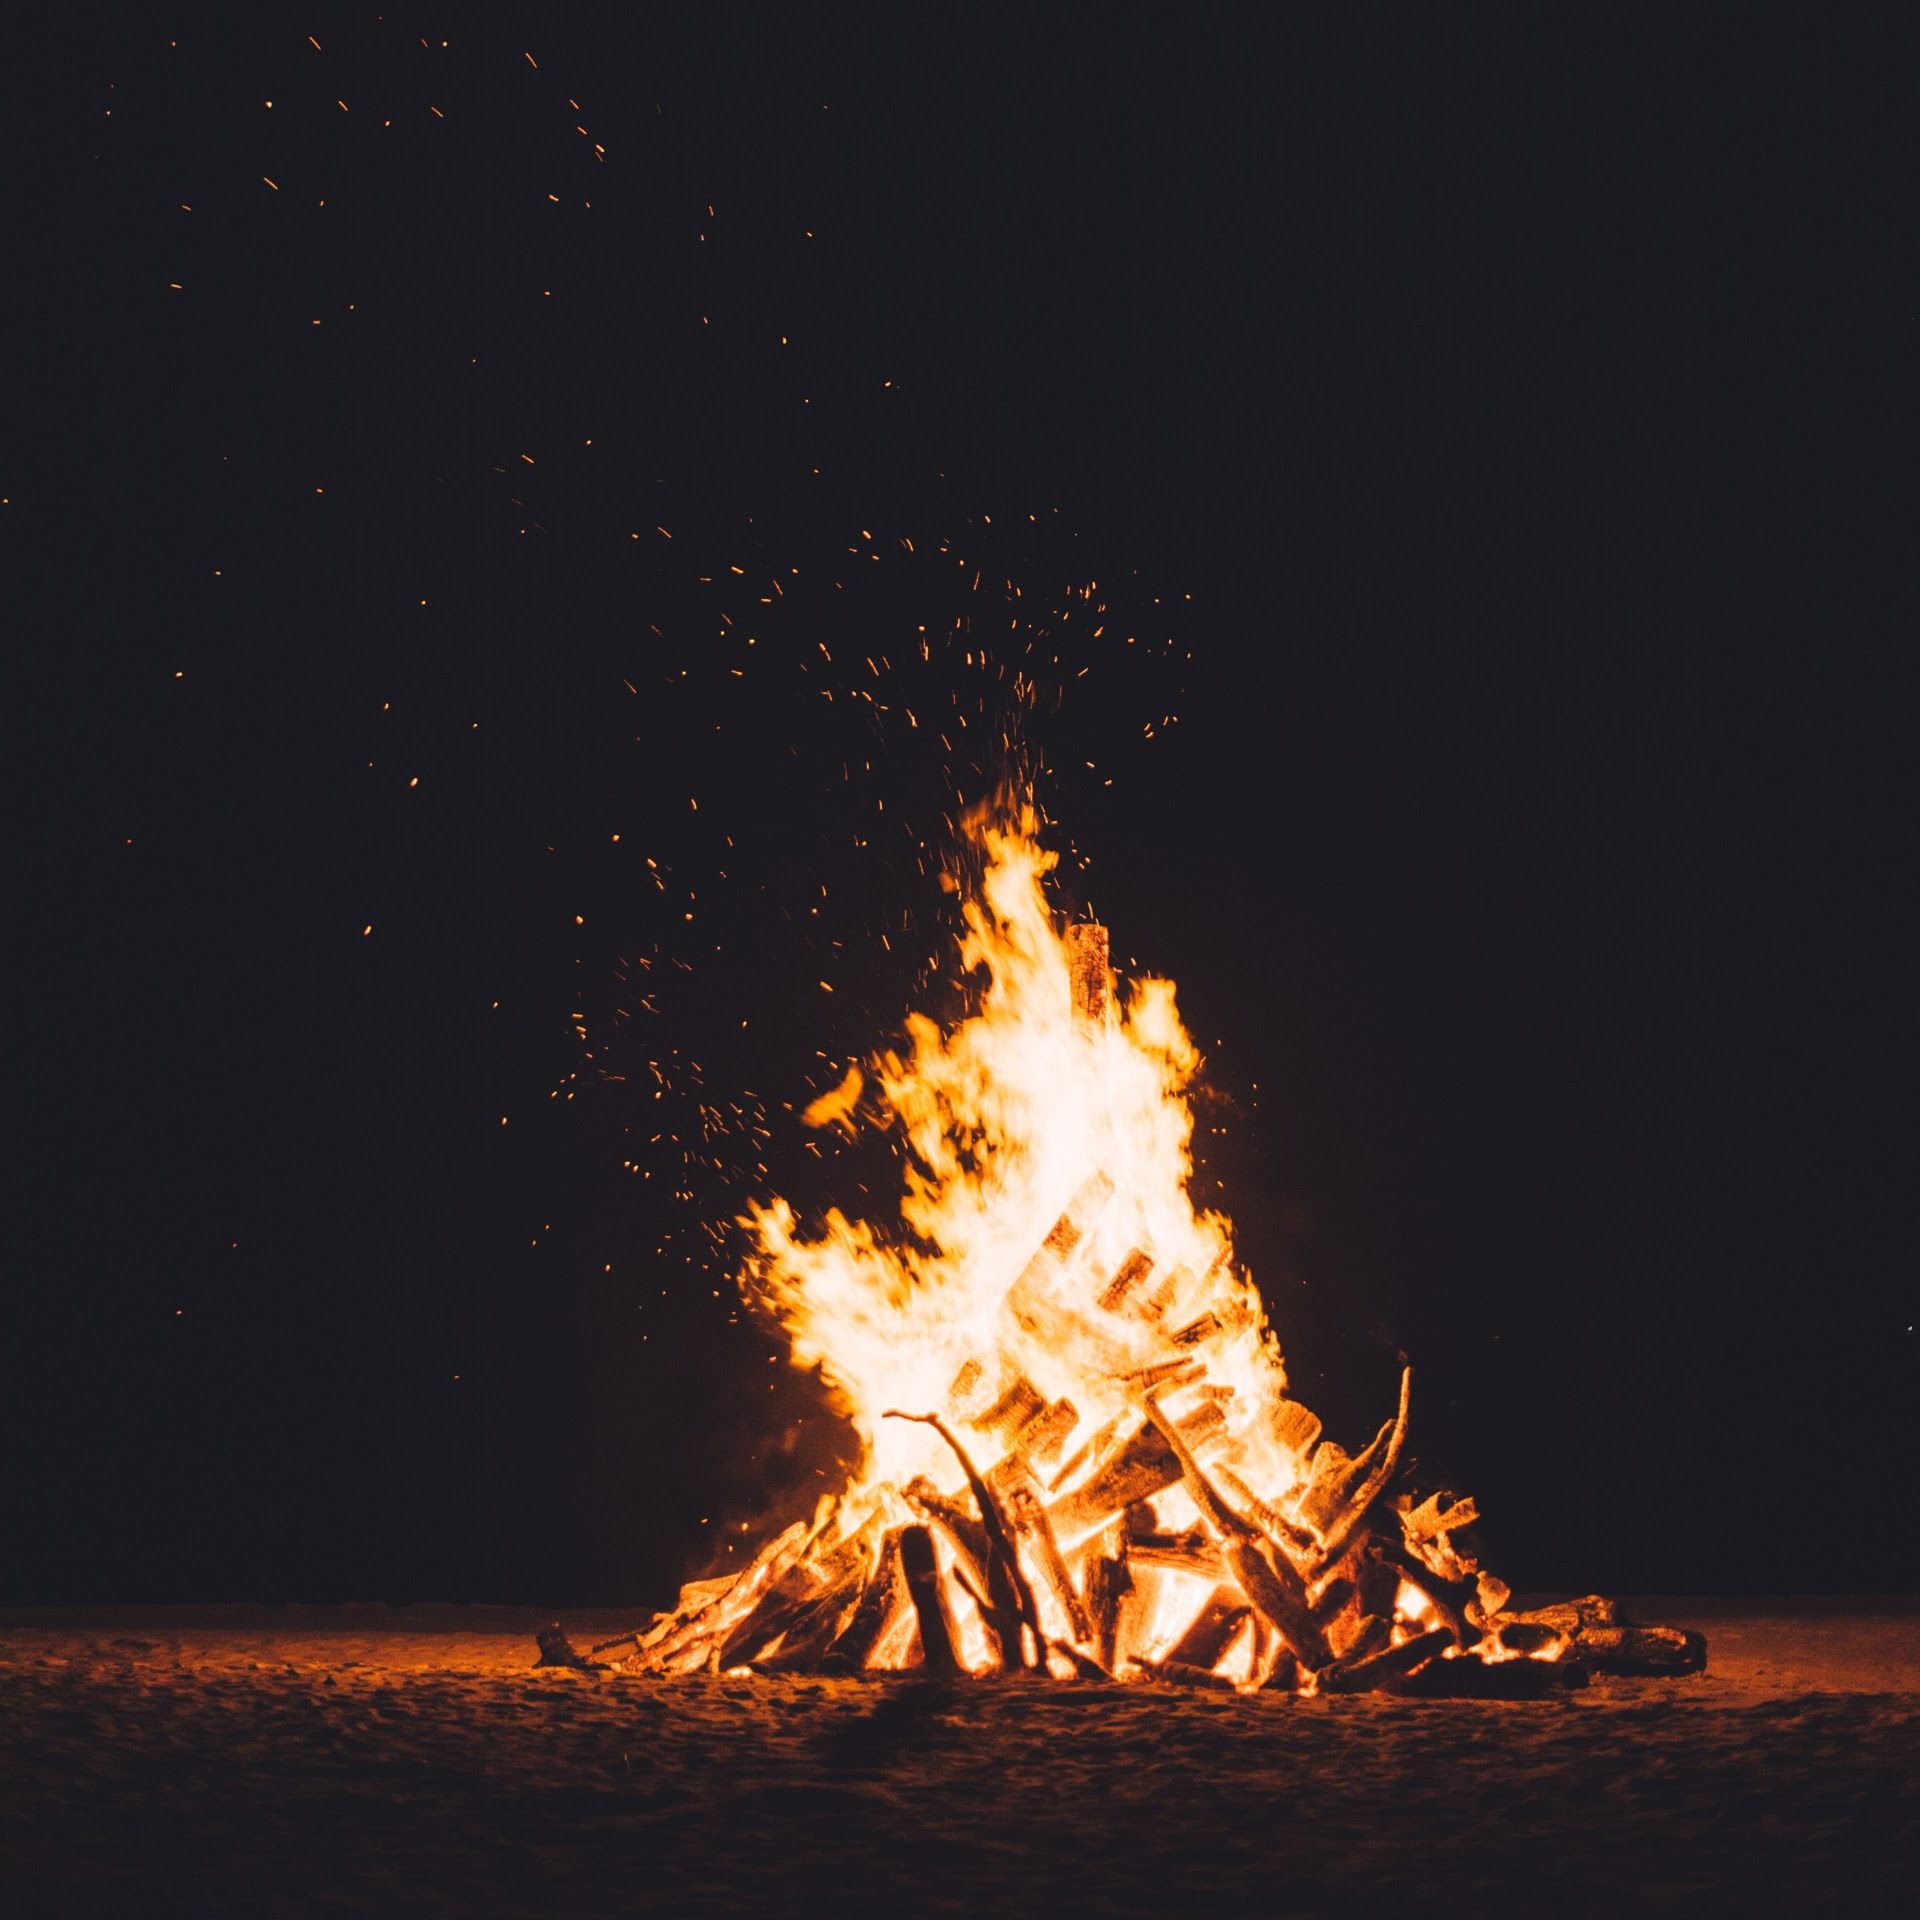 How to Use Math to Build the Perfect Bonfire